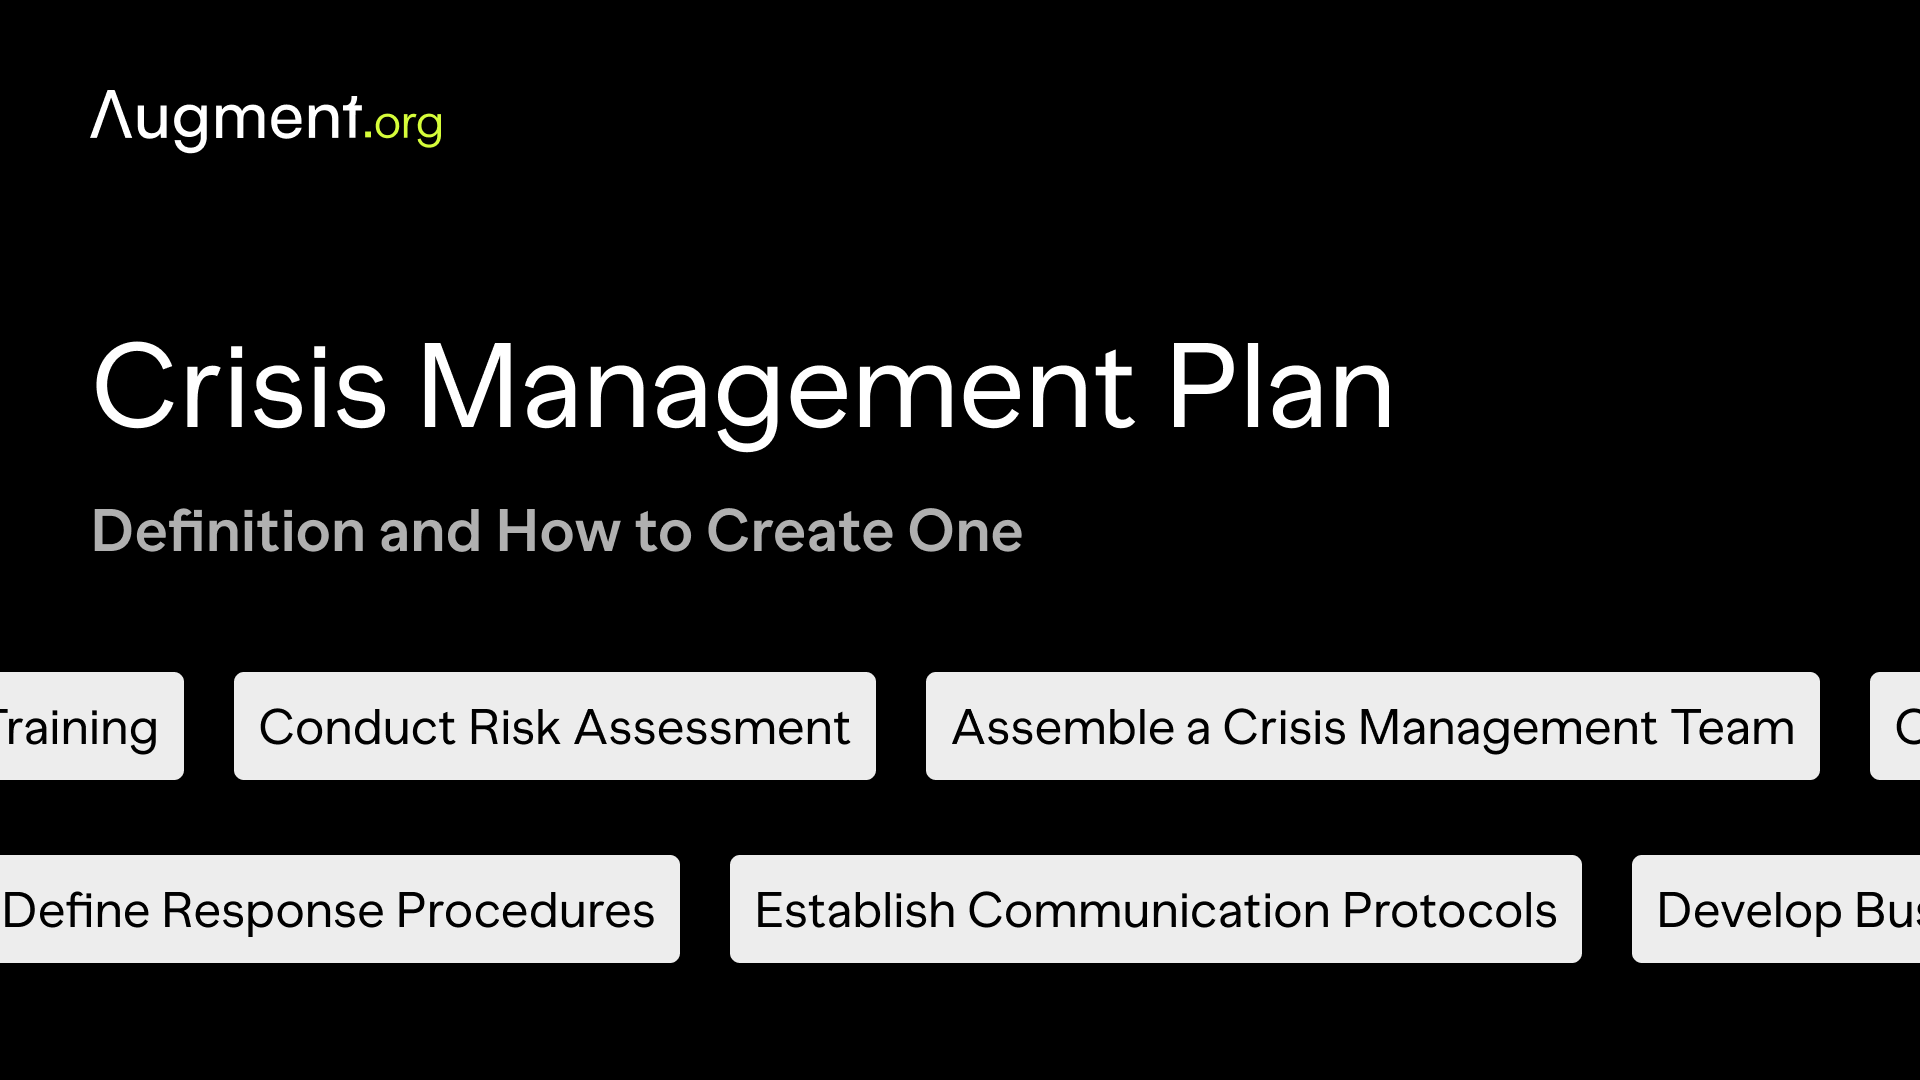 Crisis Management Plan: Definition and How to Create One